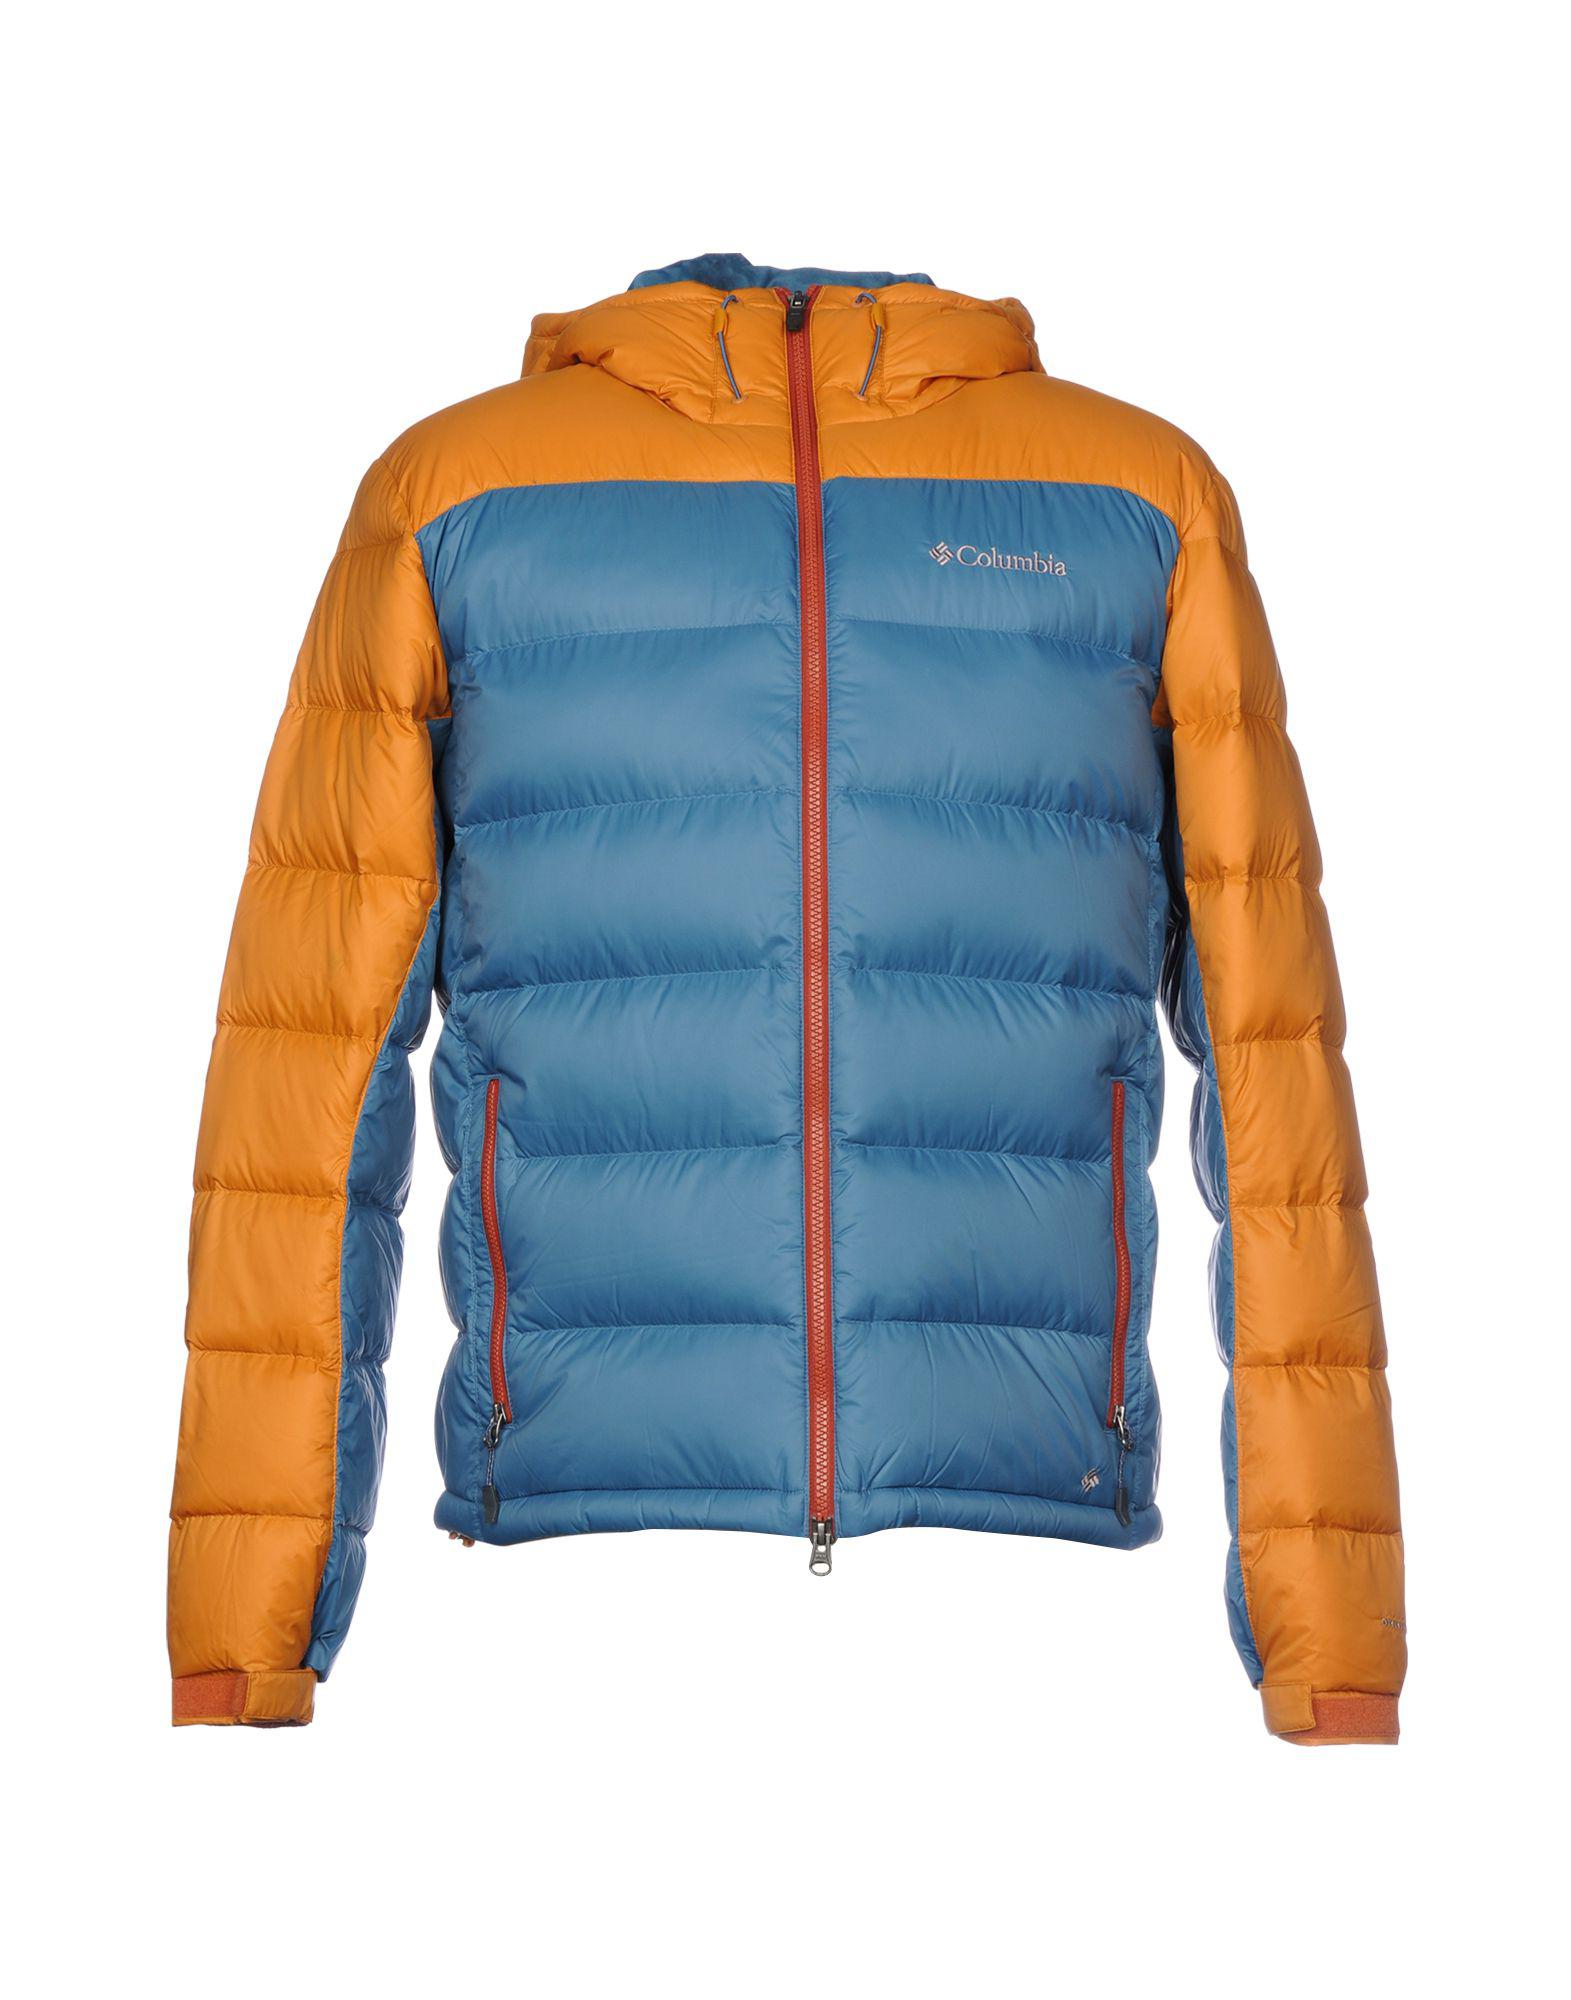 Columbia Down Jacket in Blue for Men - Lyst